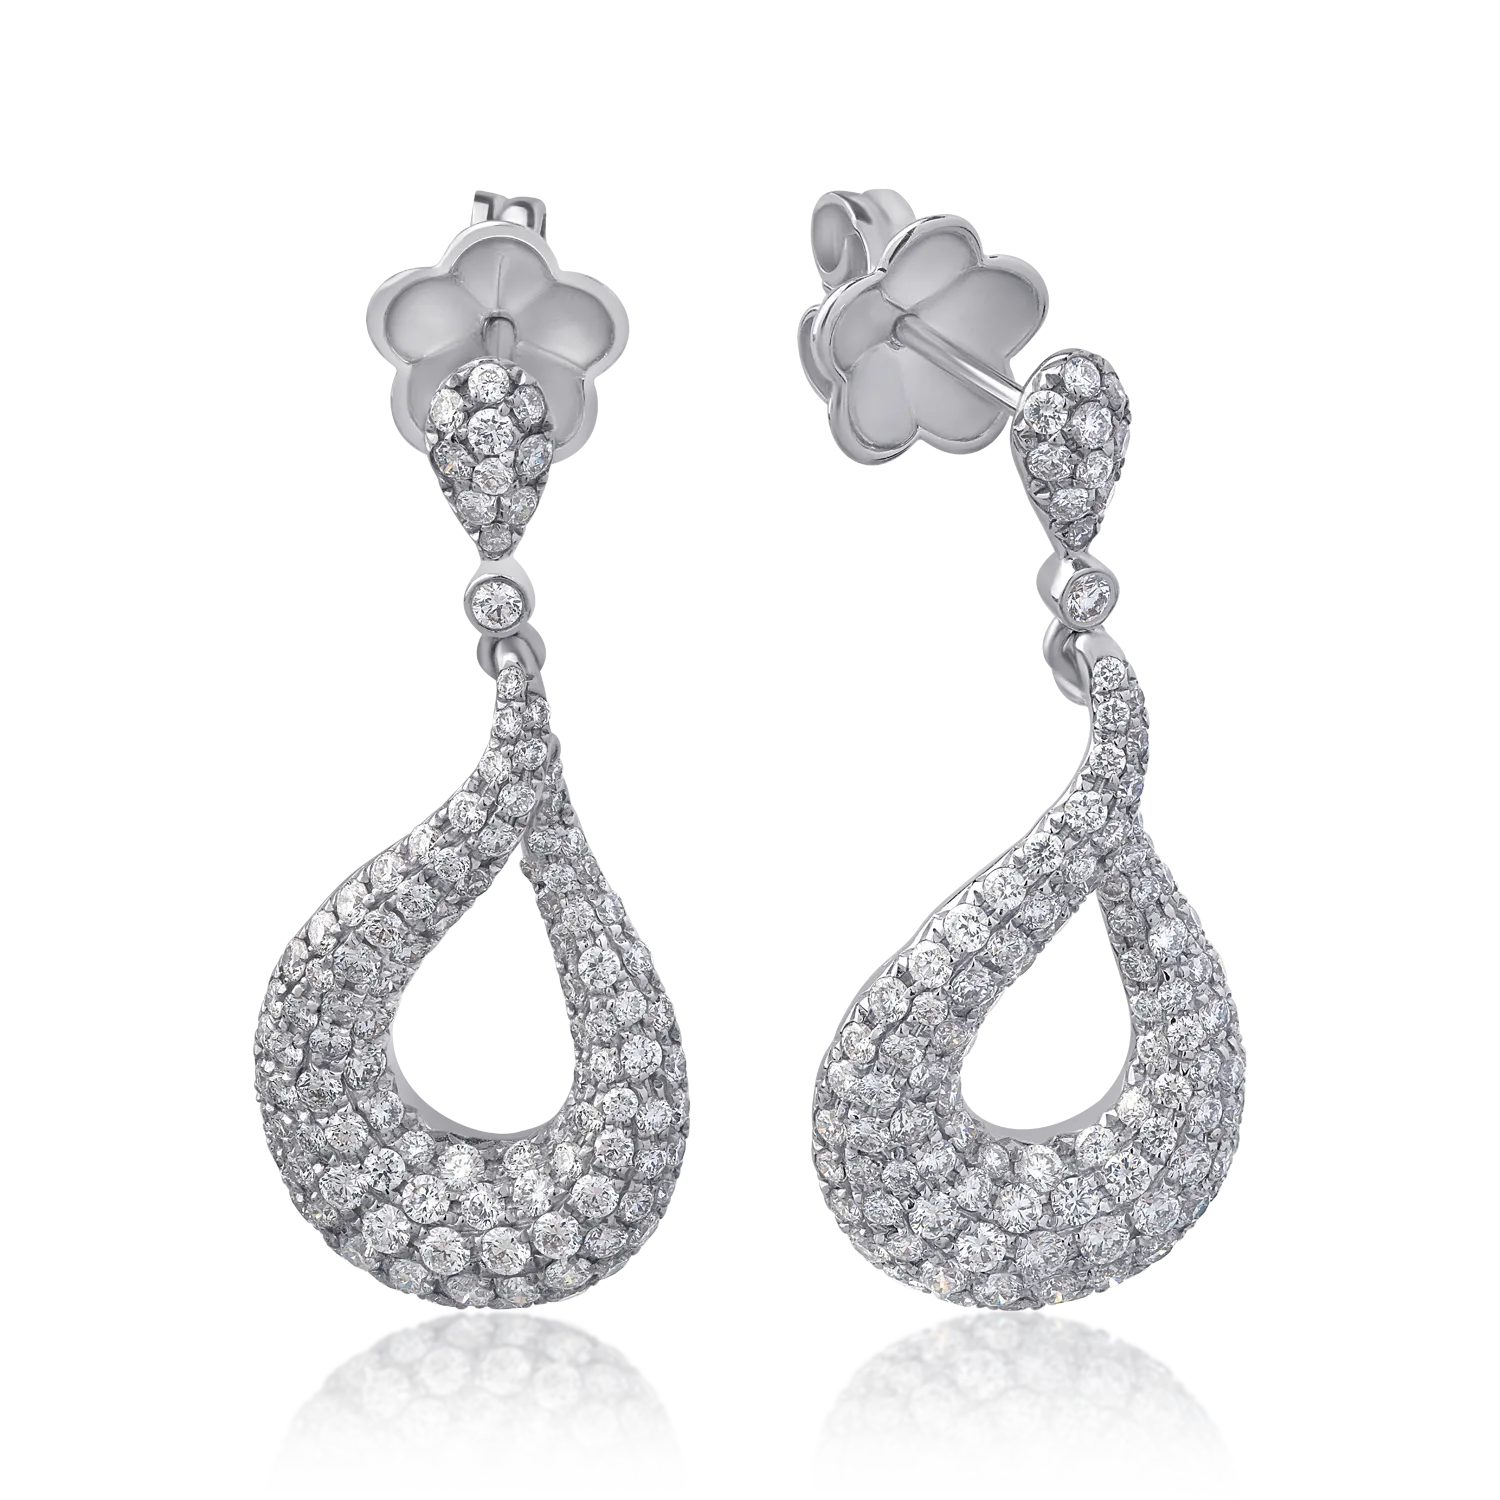 18K white gold earrings with 2.01ct diamonds